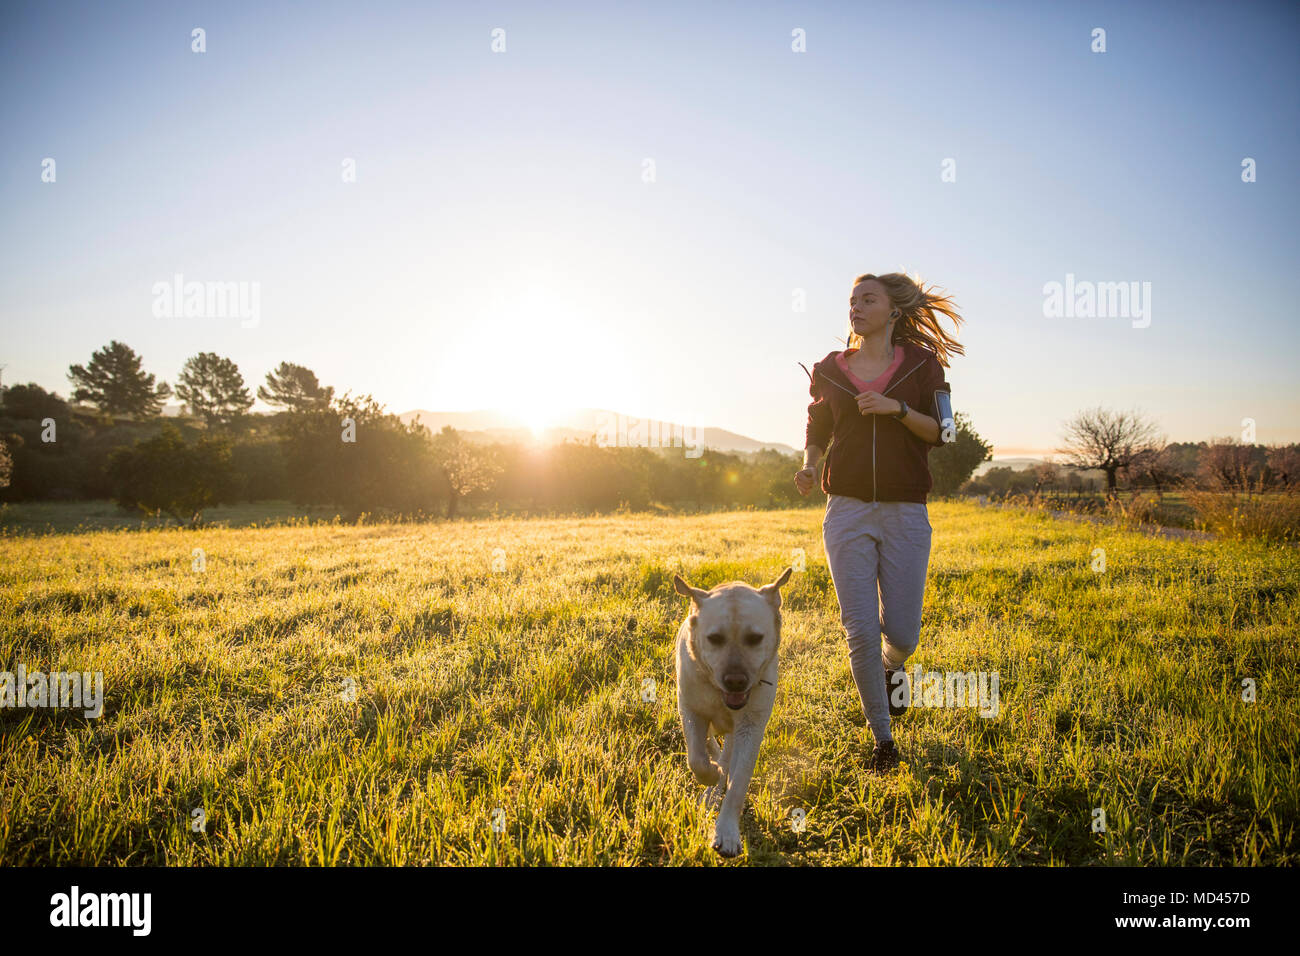 Young woman running across field, with pet dog Stock Photo